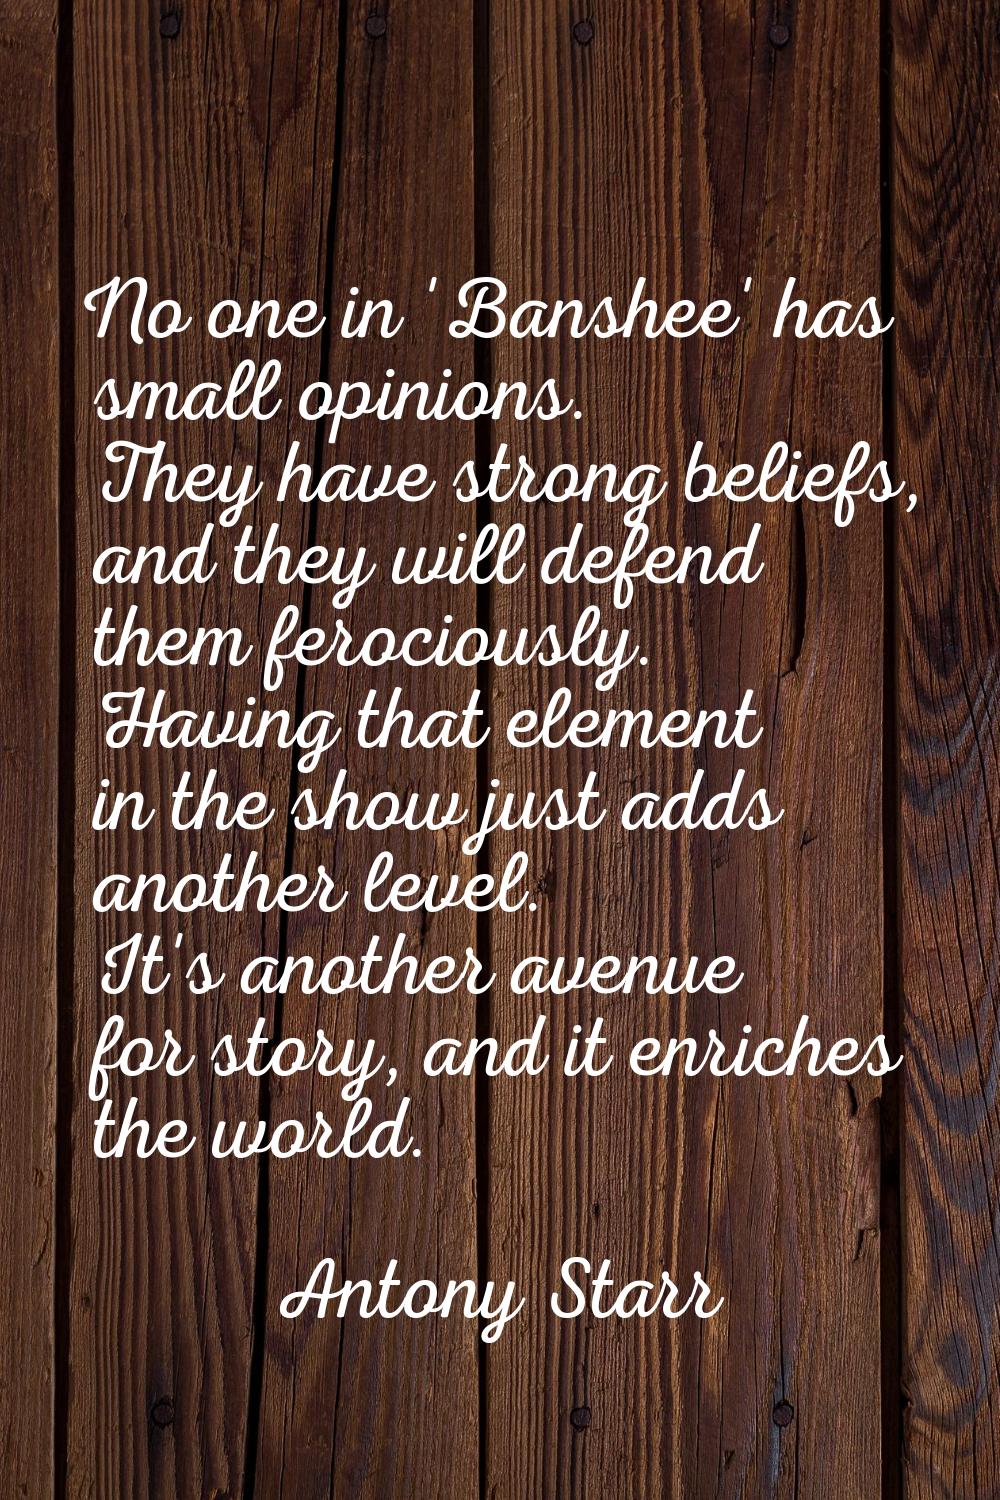 No one in 'Banshee' has small opinions. They have strong beliefs, and they will defend them ferocio